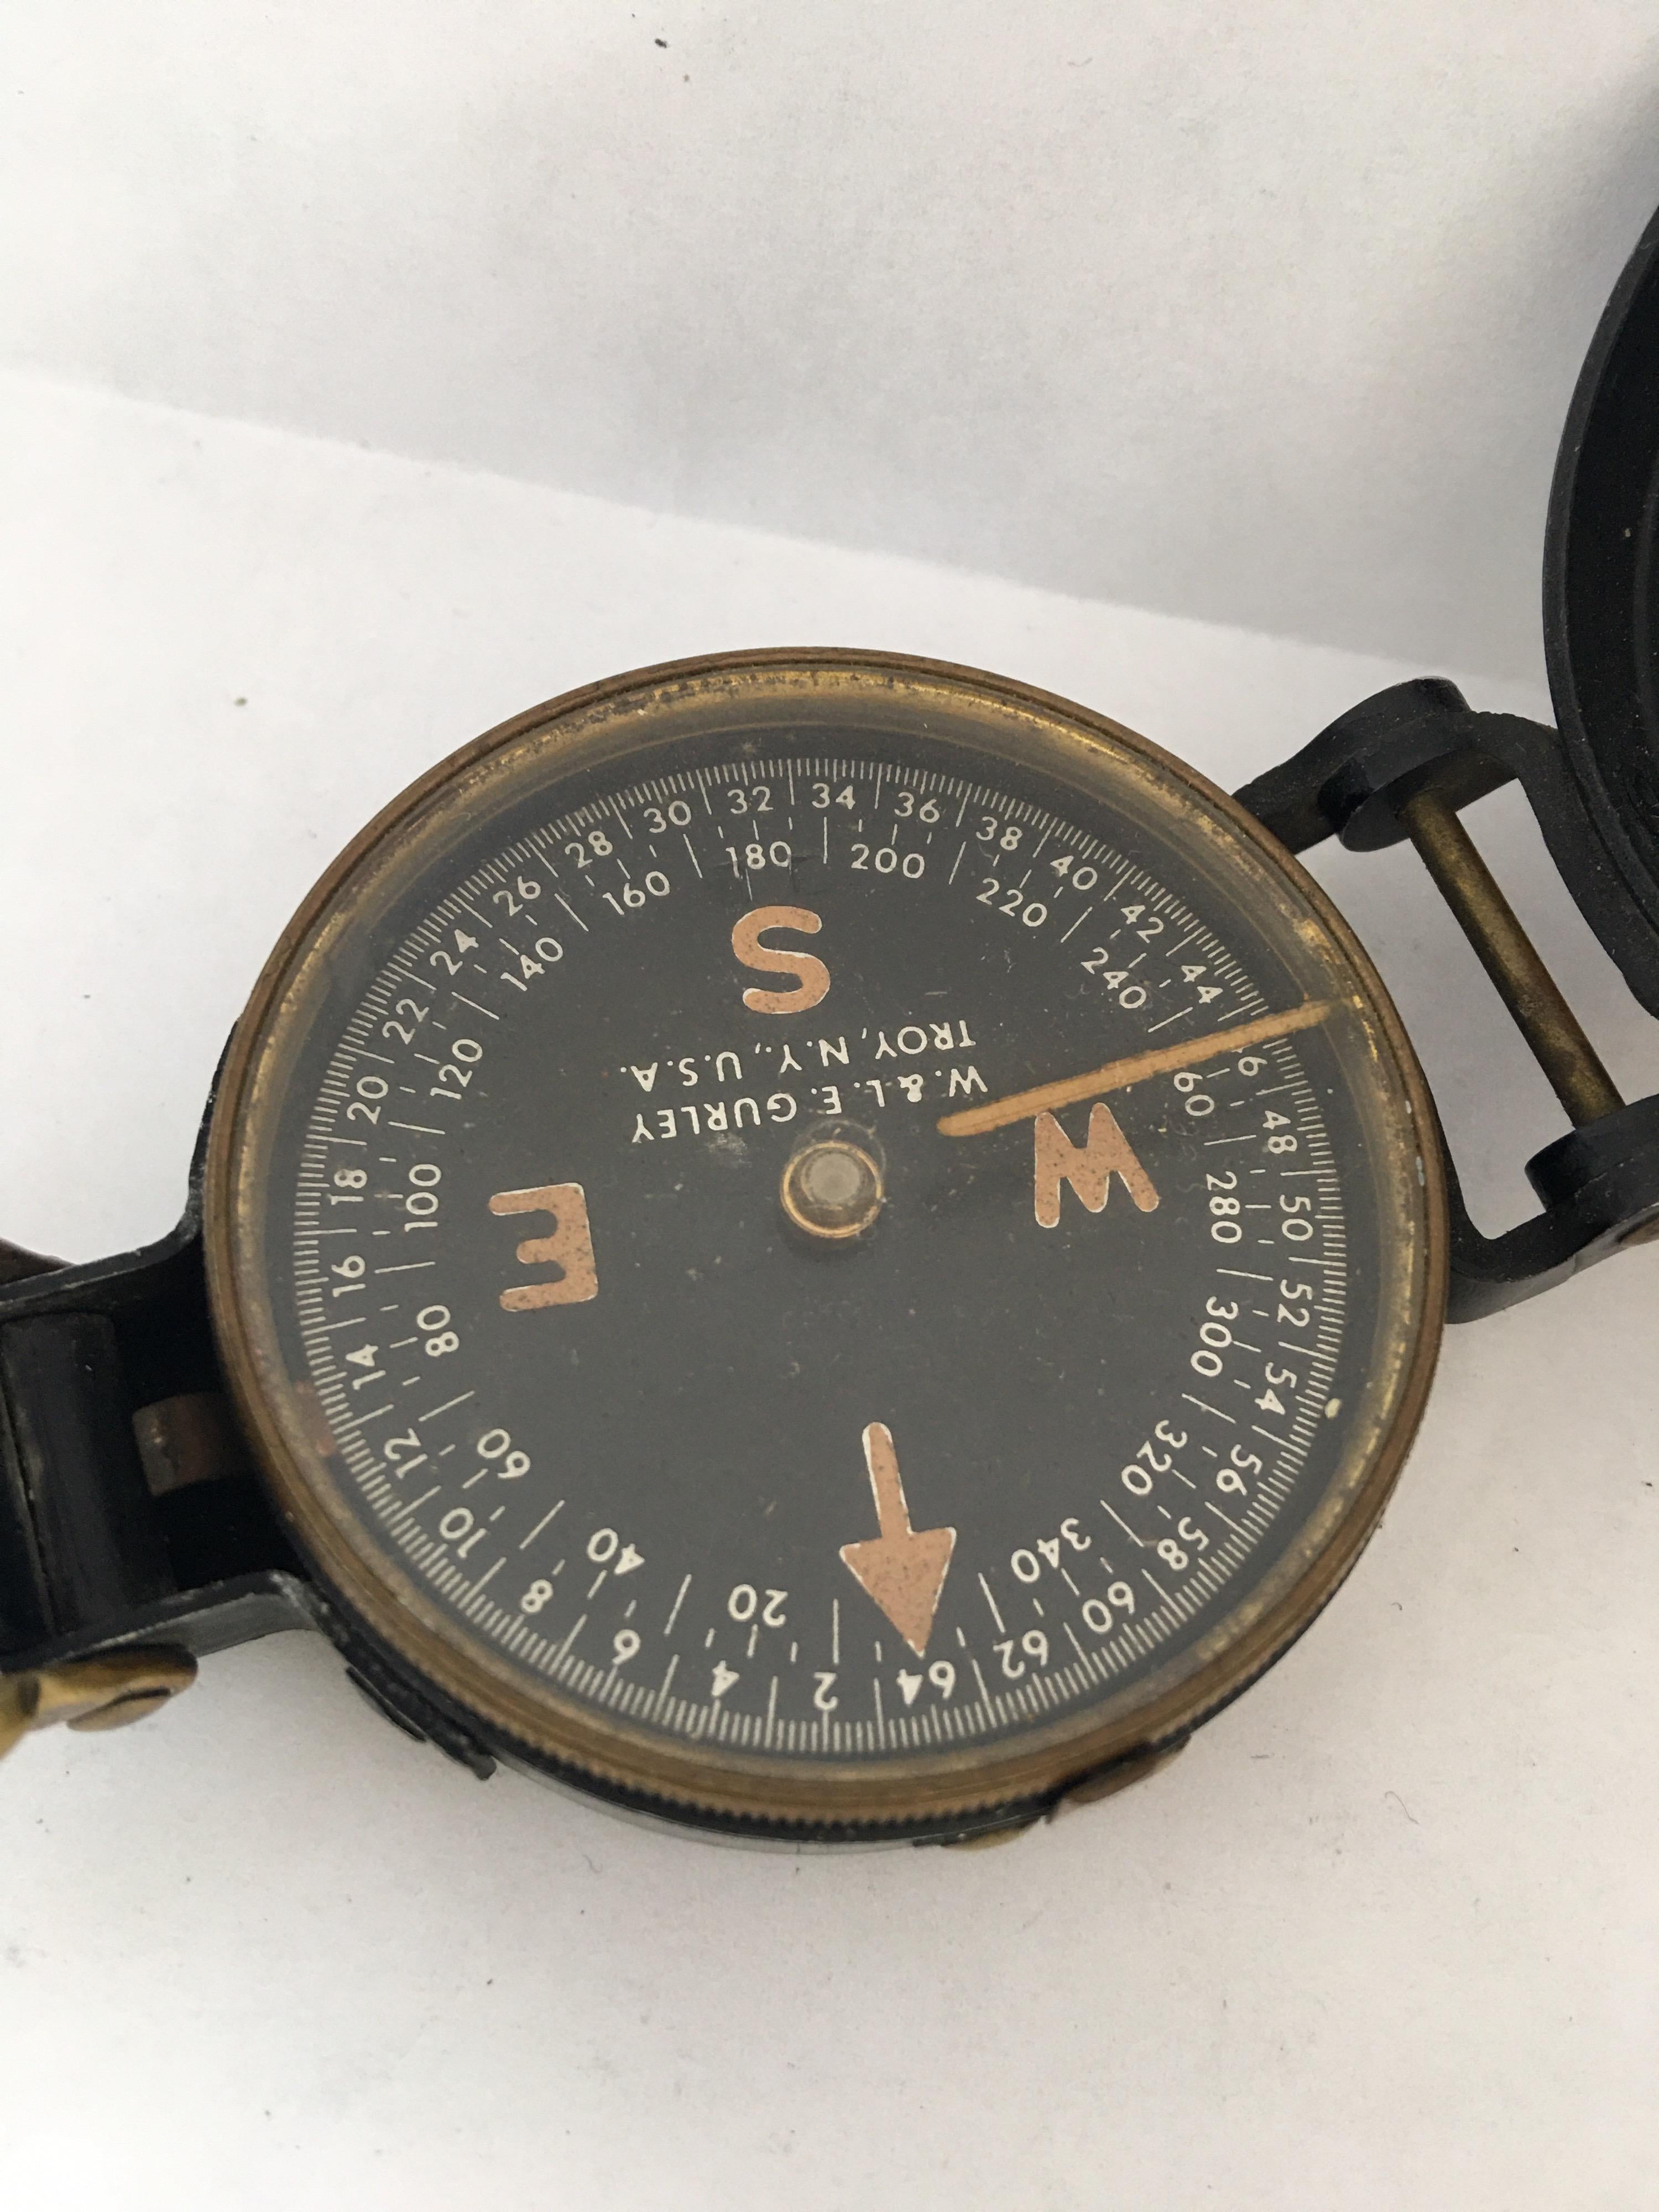 WW II Field Compass manufactured by W & L..E. Gurley Company in Troy, NY. Compass body is made of aluminum and painted black with thumb ring, a magnetic floating dial, rear sight with magnifying lense and sighting wire intact. aluminbody measures